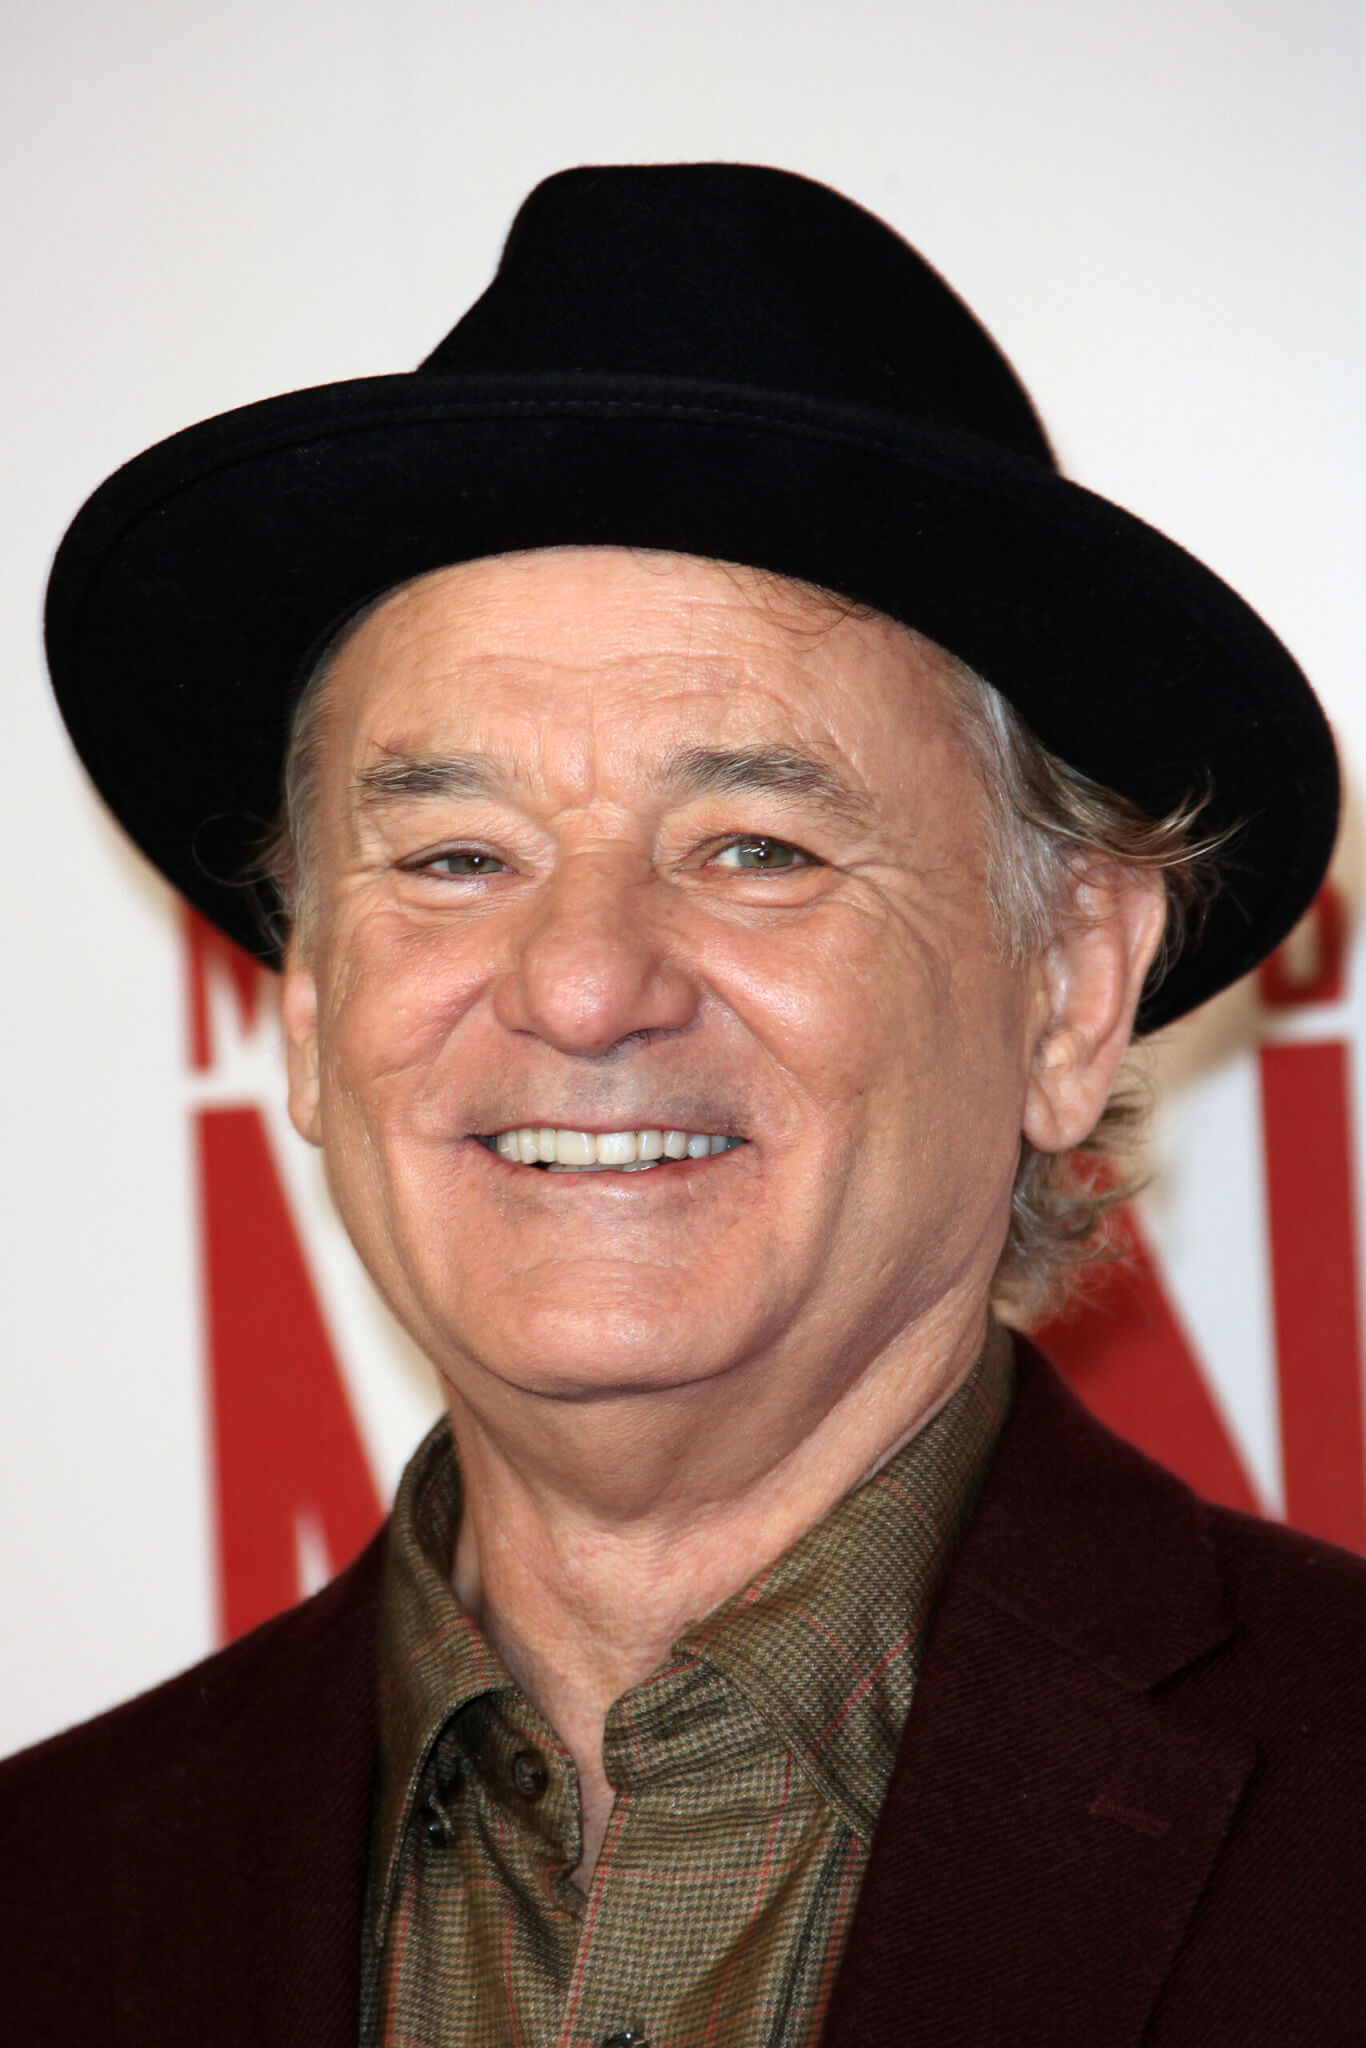 Bill Murray at the Premiere of "The Monuments Men" 2014 in London, England